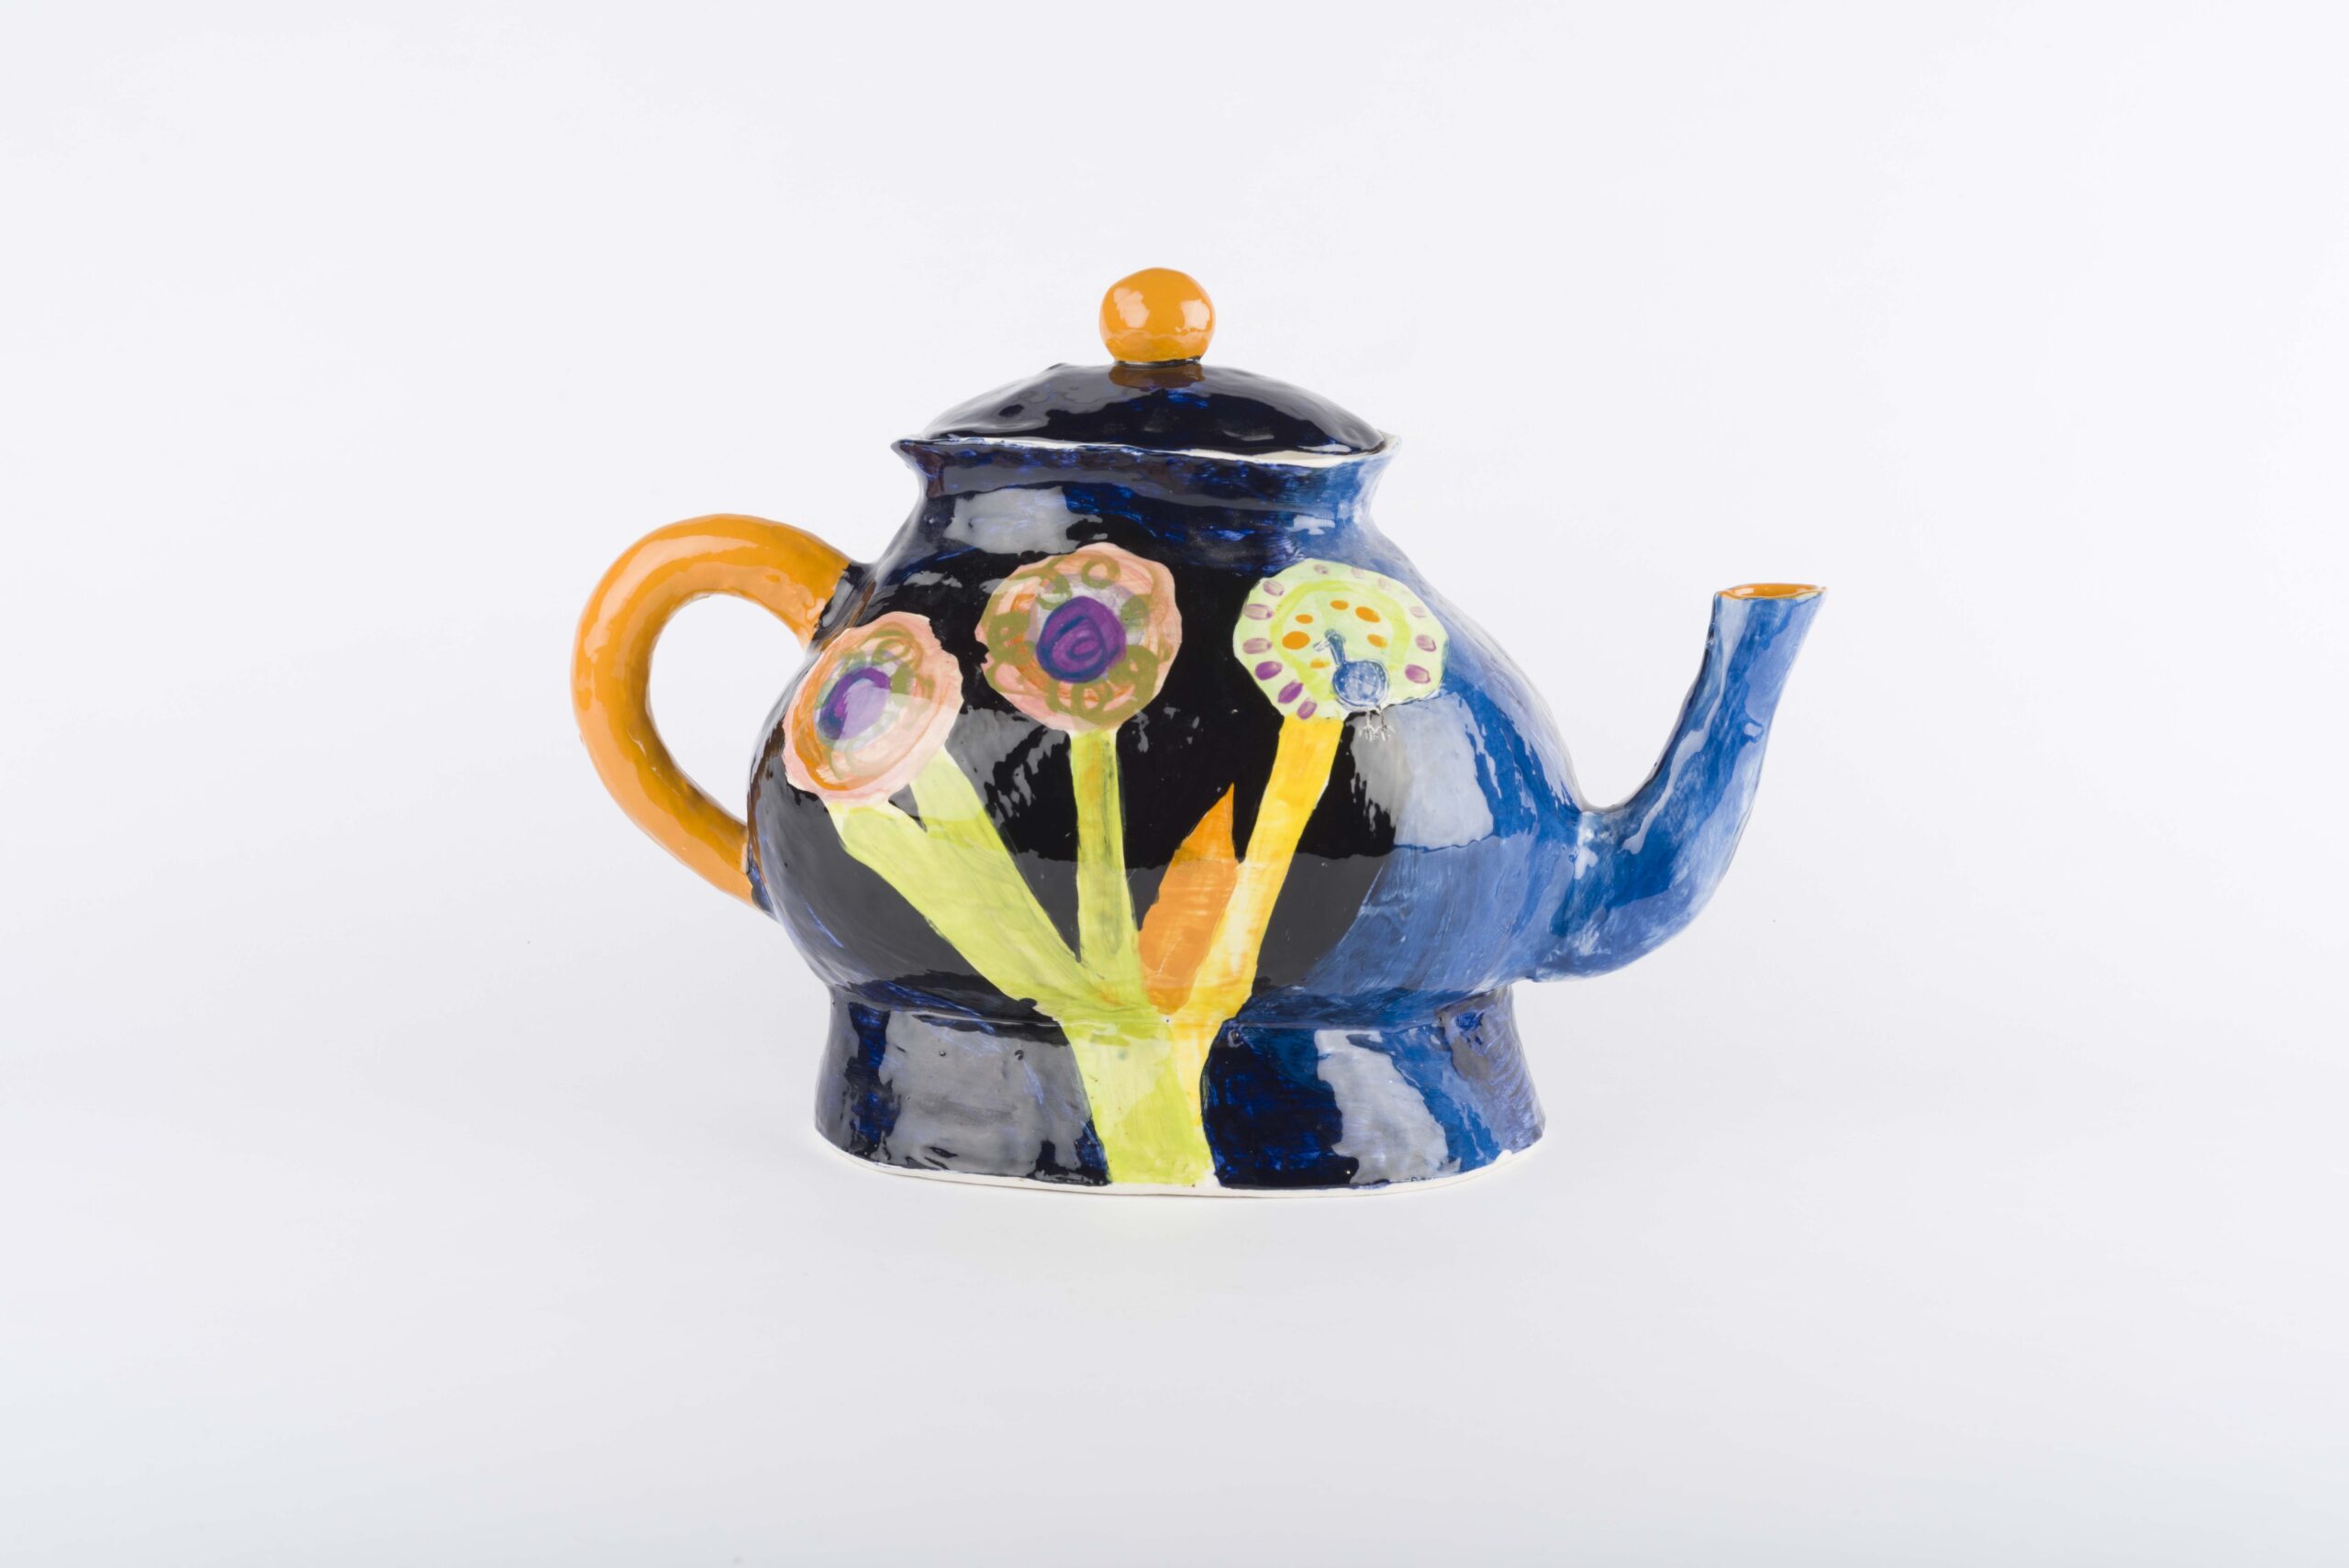 Tea Pot by Edla Griffiths, courtesy of York Museums Trust